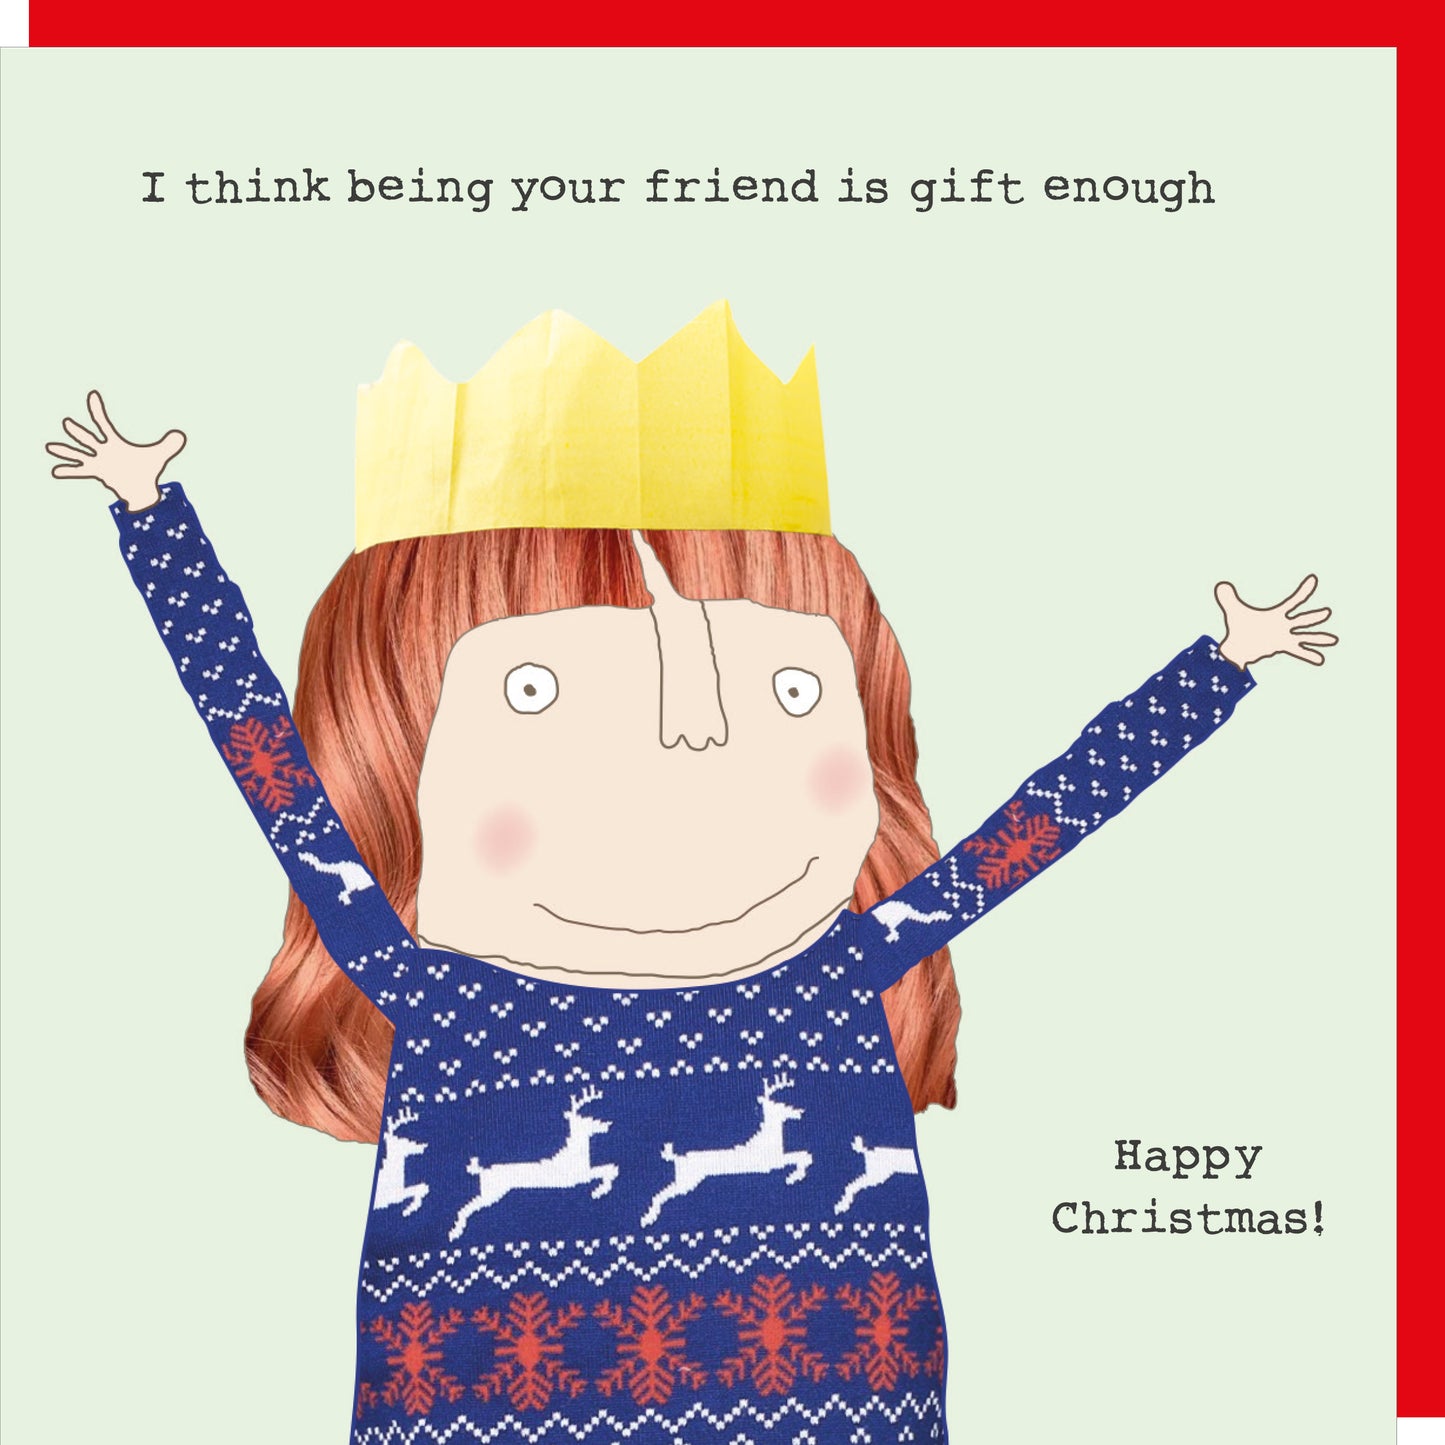 Rosie Made A Thing Gift Enough Christmas Card Greeting Card